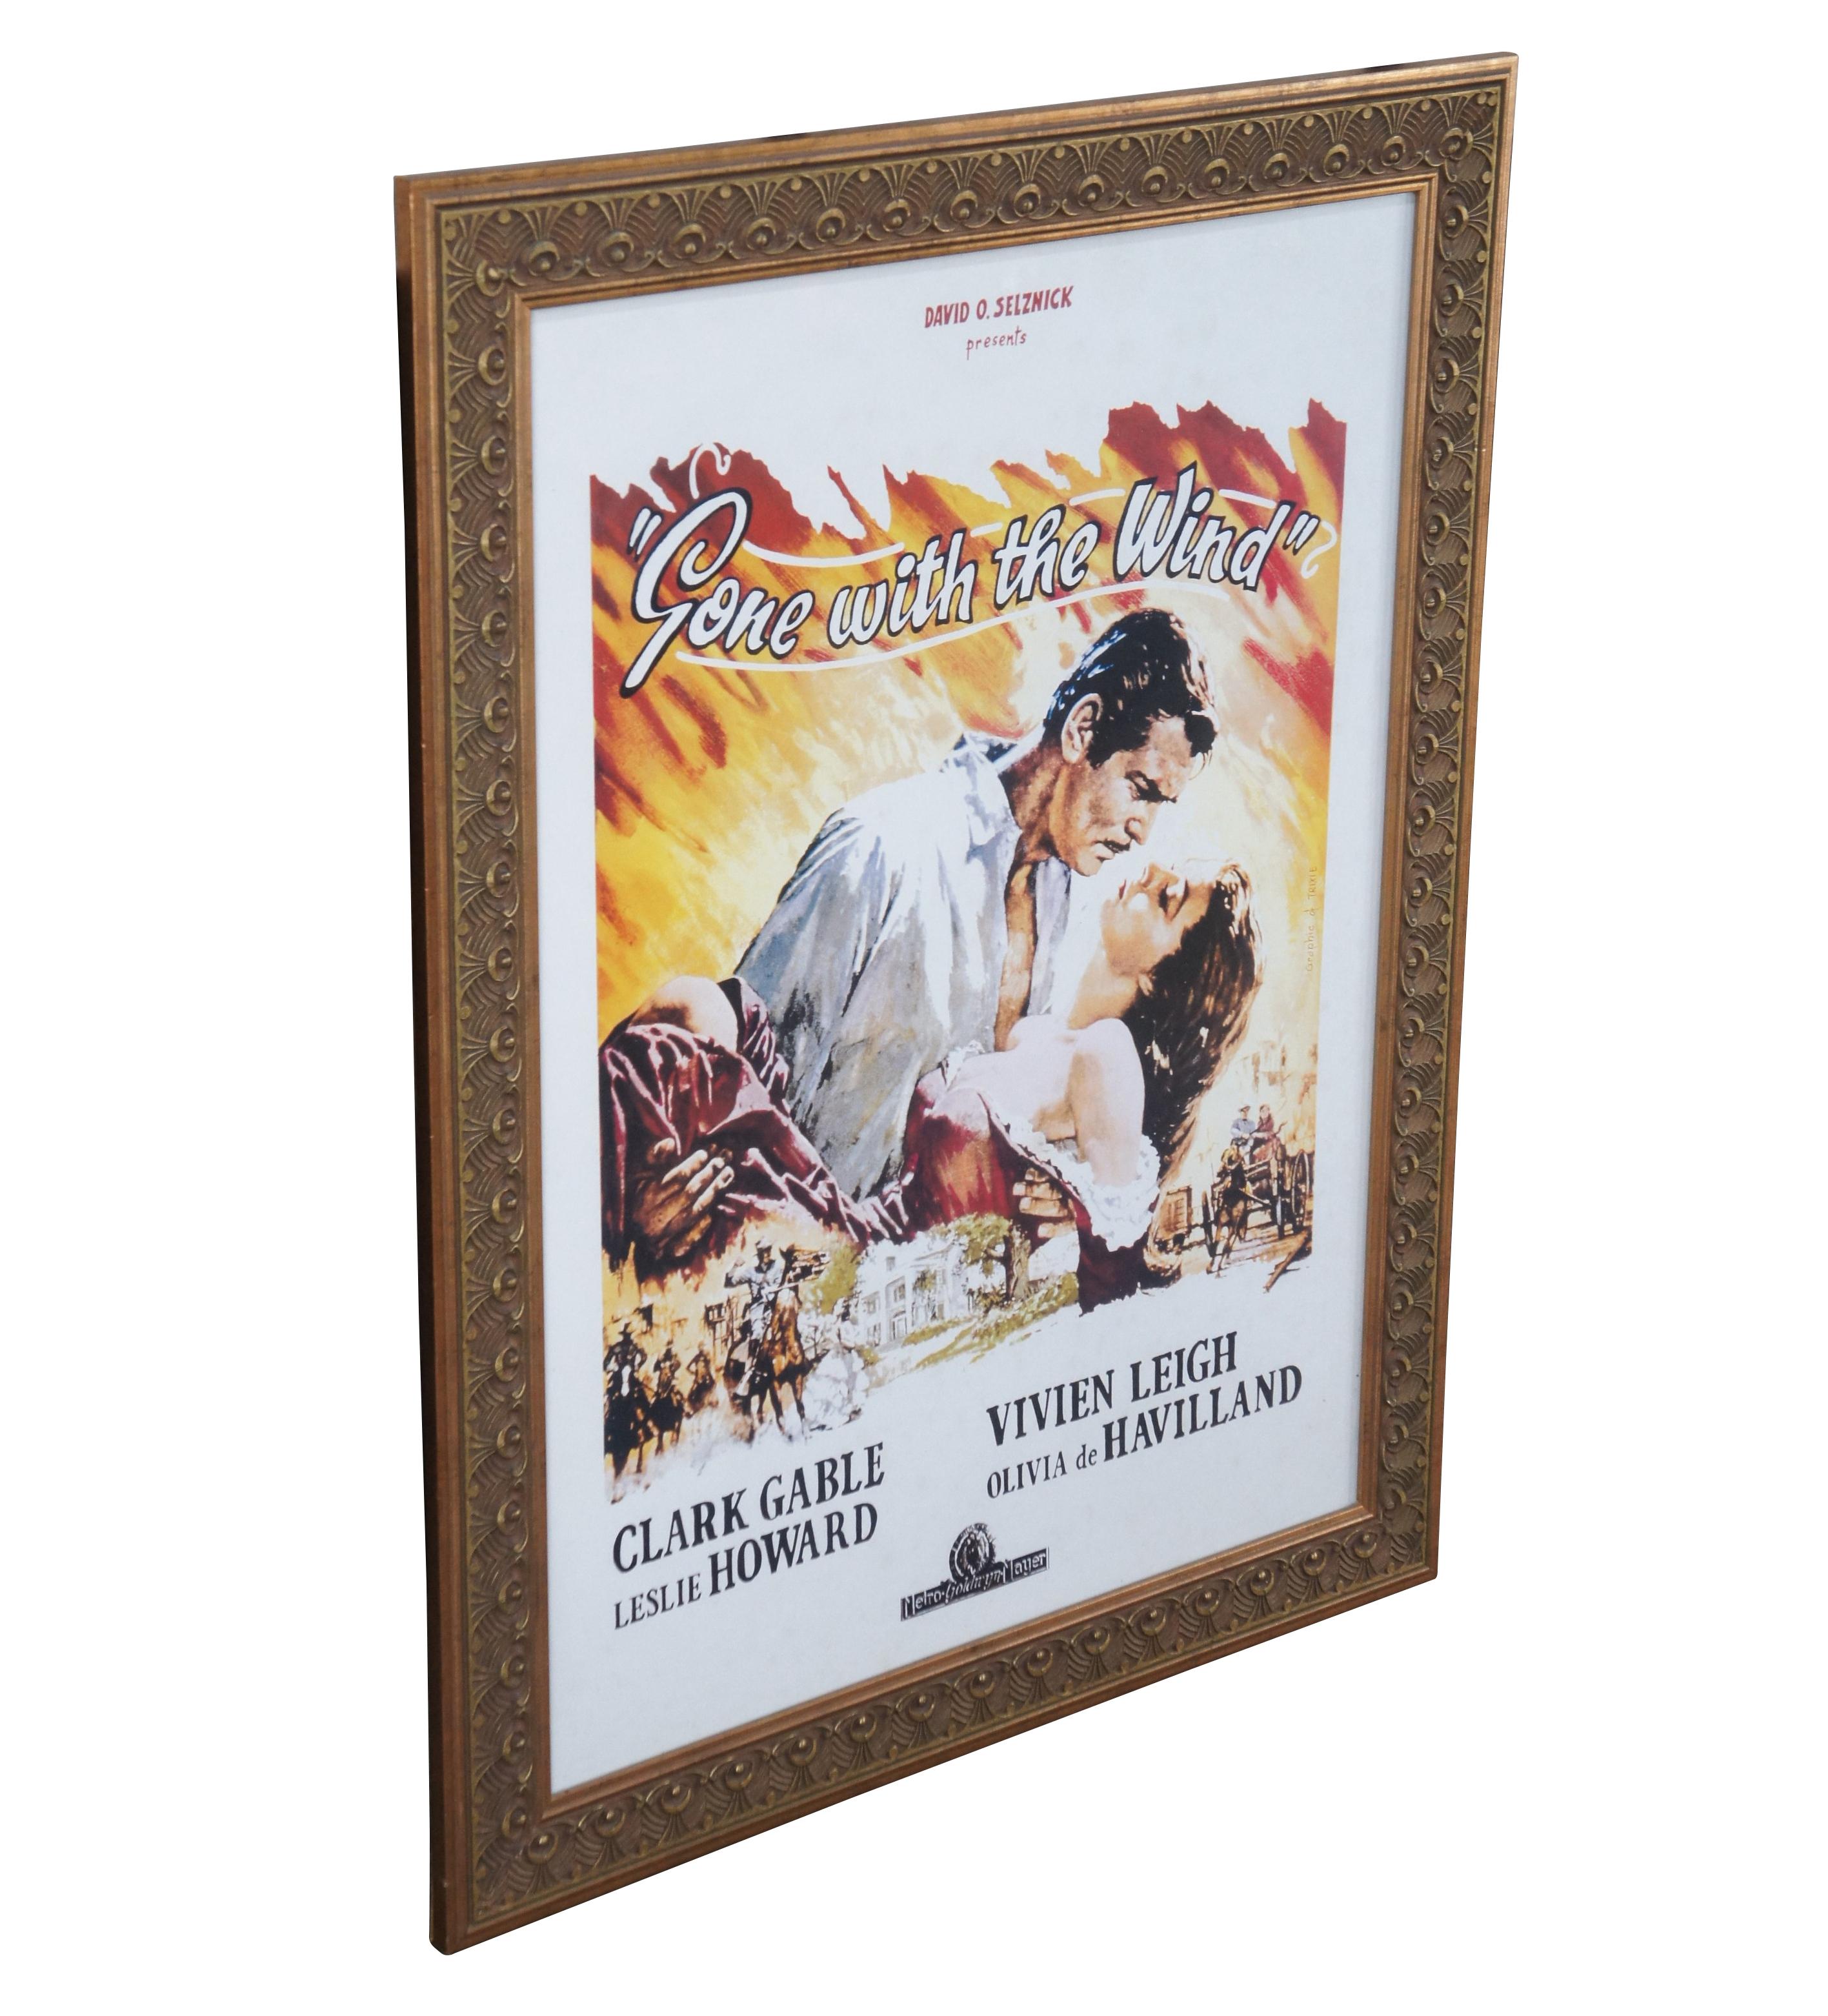 Vintage Gone with the Wind movie ad poster, framed in ornate art deco style gold frame.

David O. Selznick presents, Gone with the Wind, starring Clark Gable, Leslie Howard, Vivien Leigh, and Olivia de Havilland, Metro Goldwyn Mayer, Graphic of